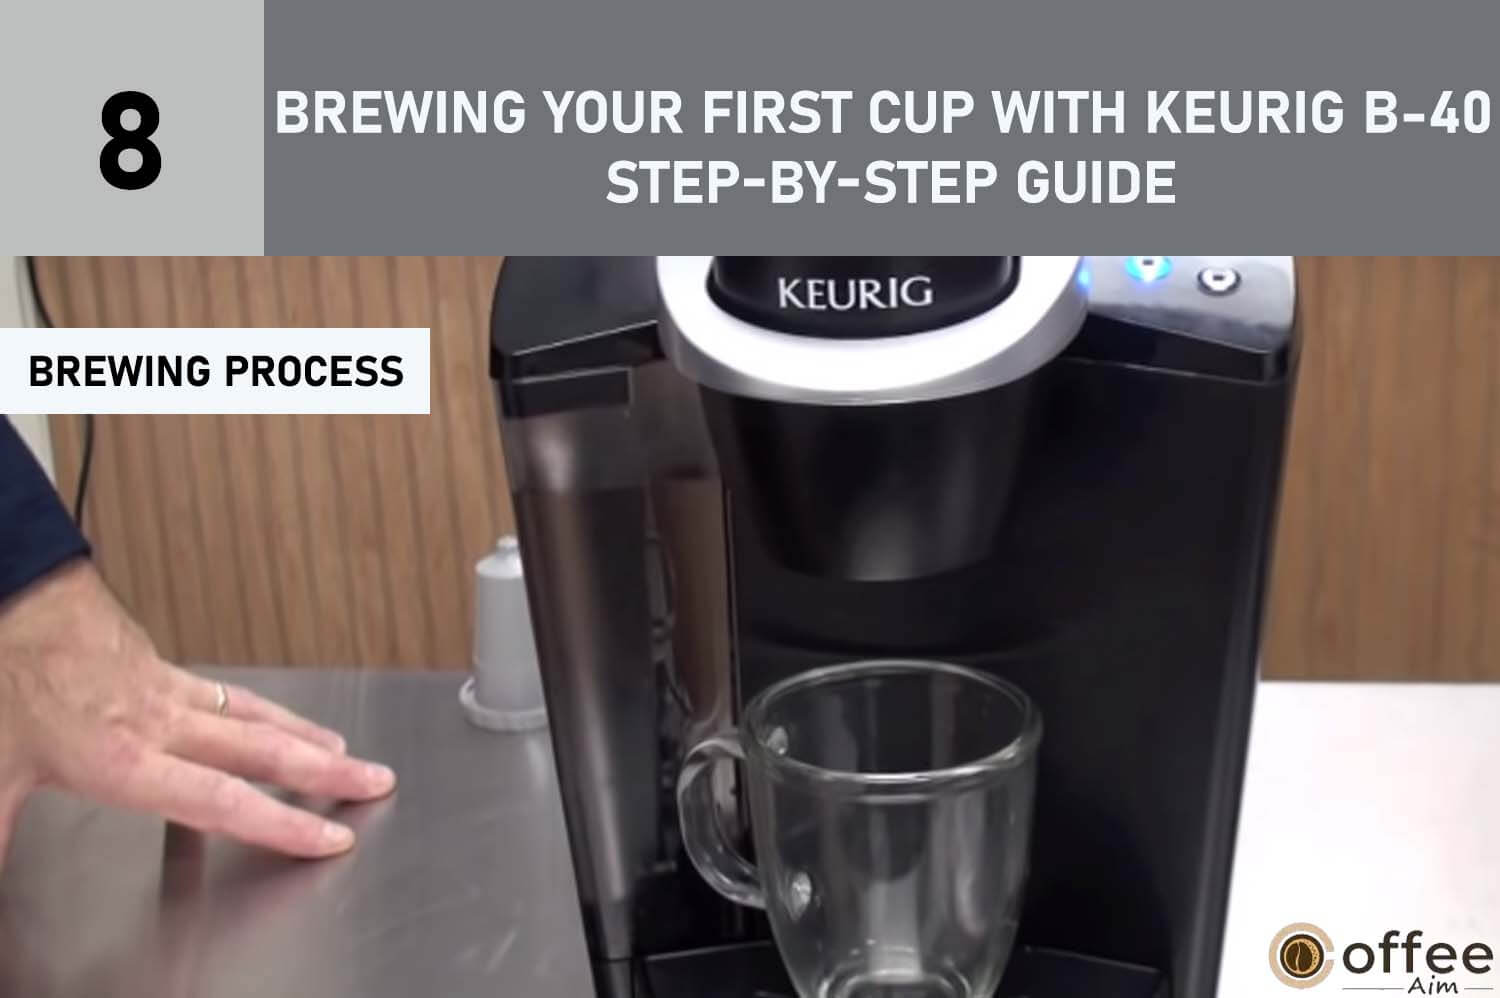 This image vividly illustrates the intricate "Brewing Process," perfectly complementing the comprehensive guide titled "Brewing Your First Cup with Keurig B-40 - Step-by-Step Guide" within the informative article "How to Use Keurig B-40."